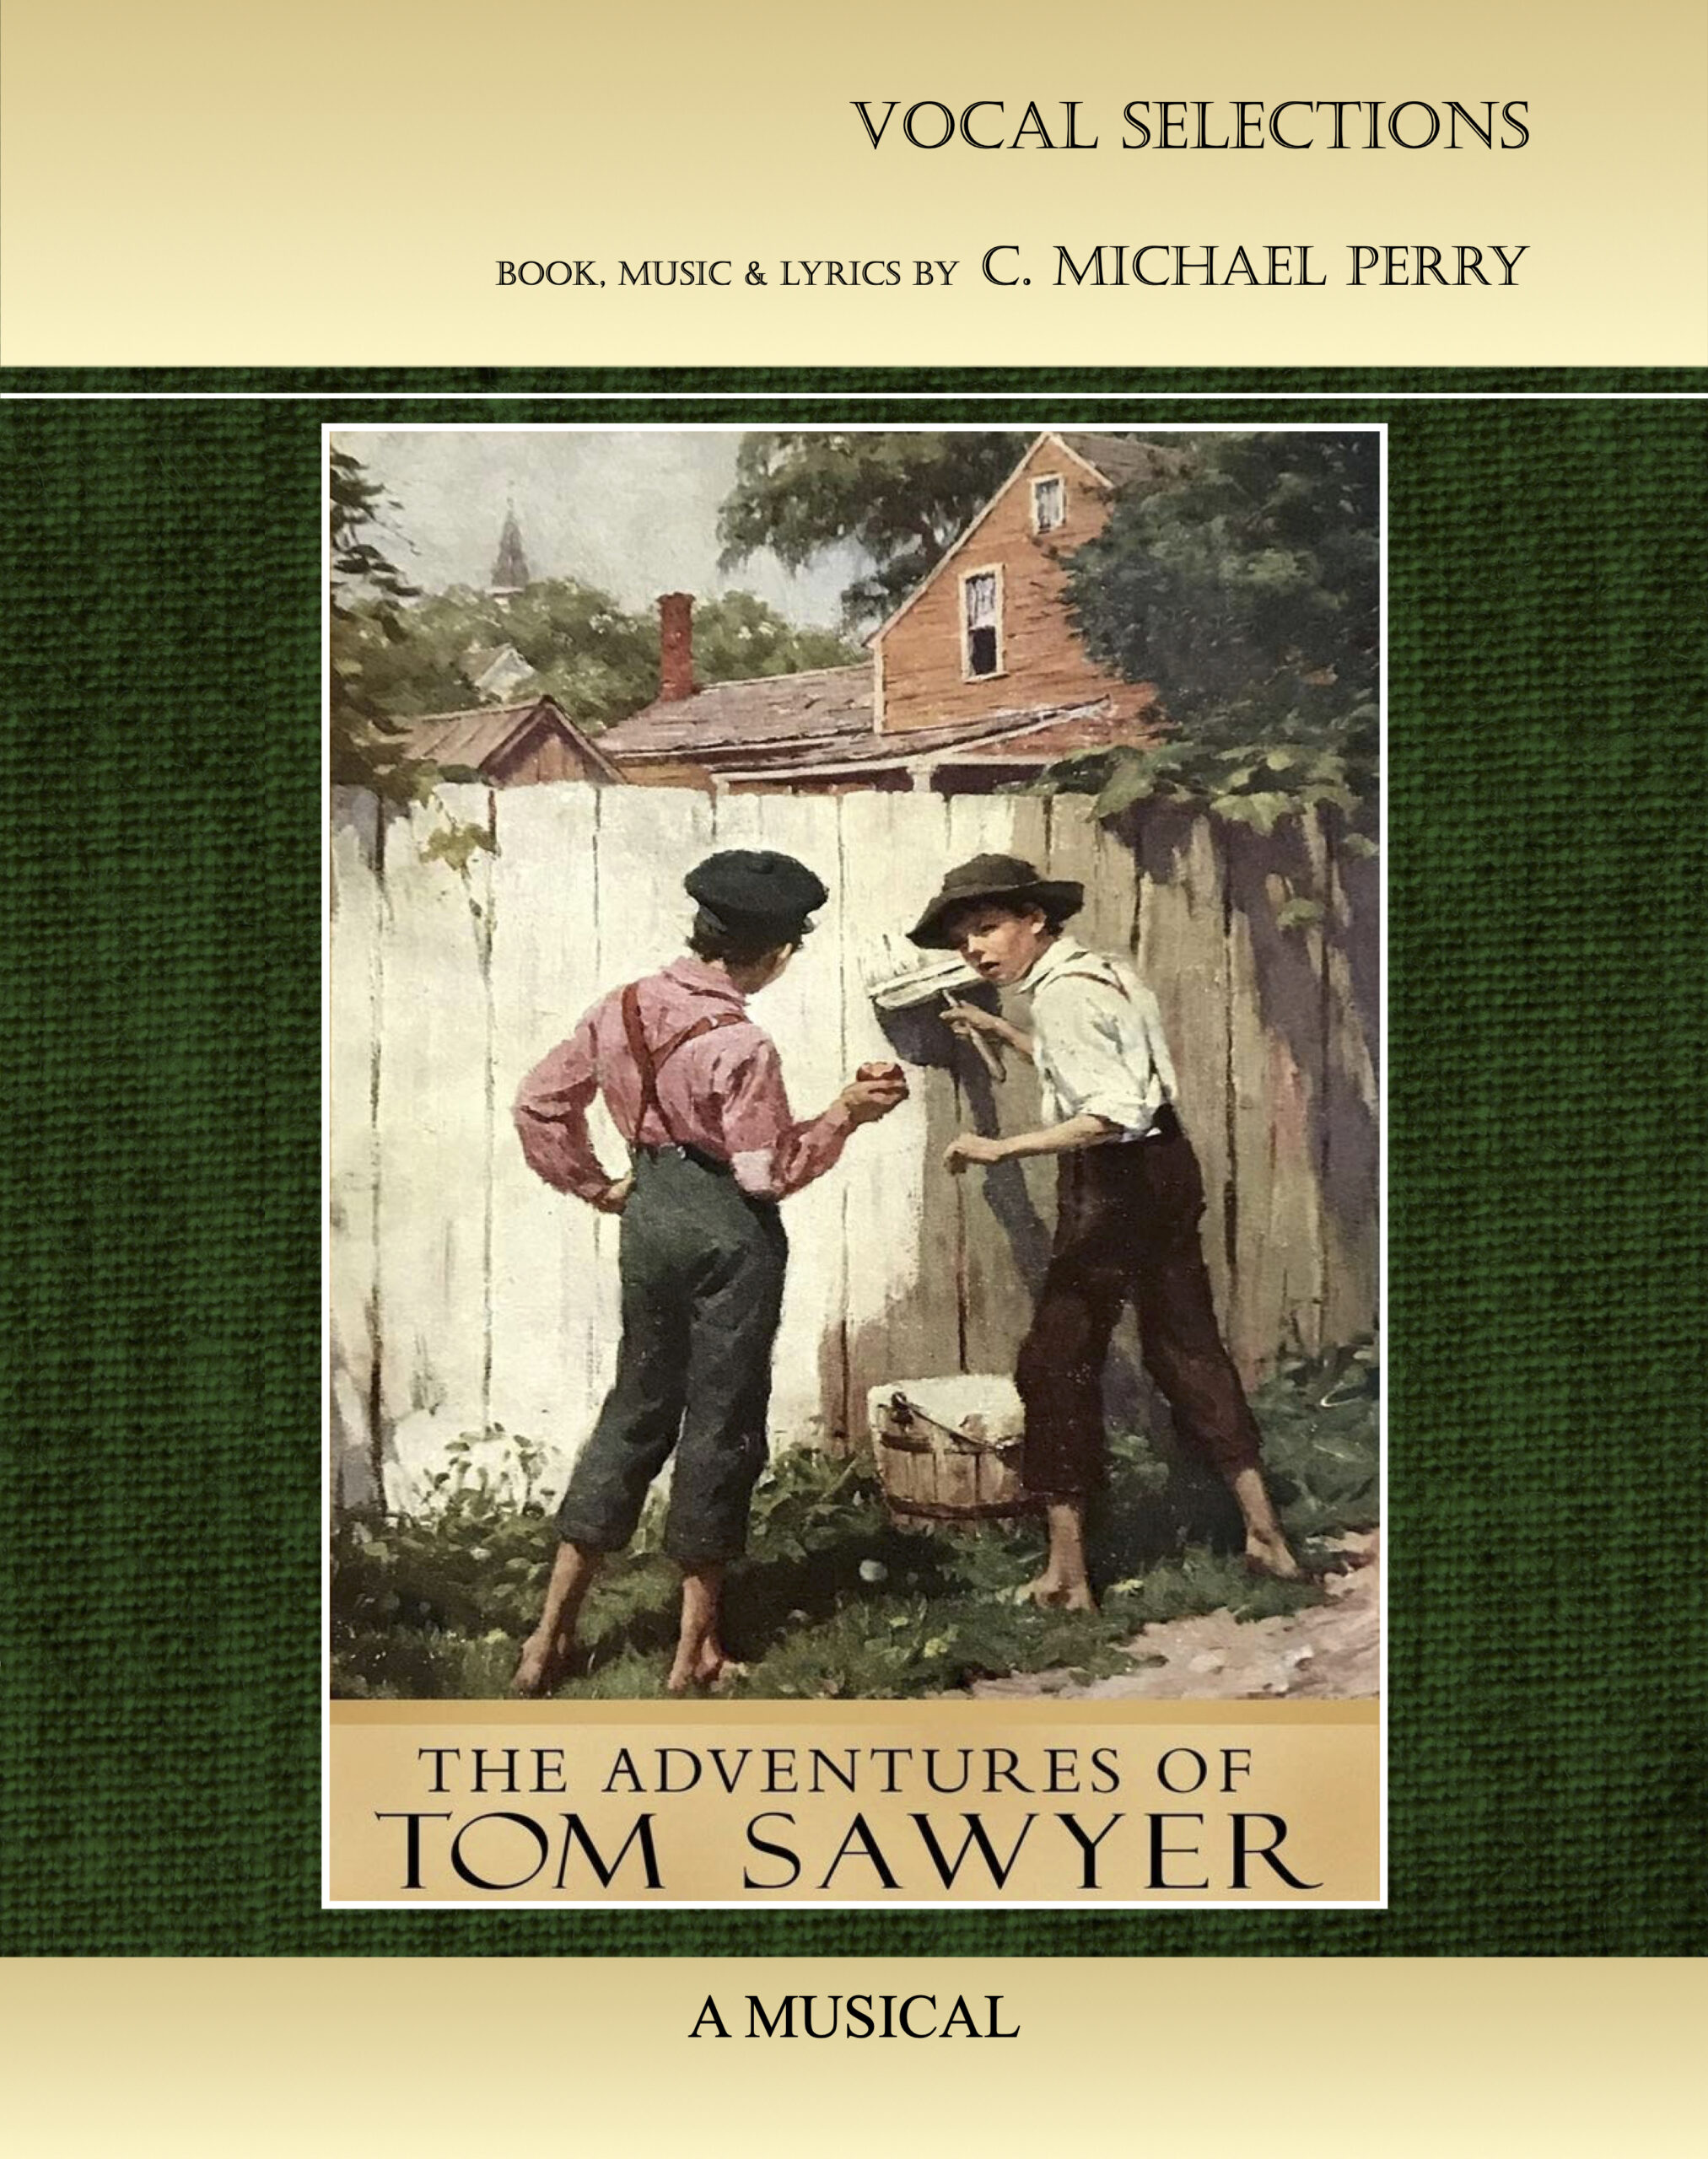 Tom Sawyer — Vocal Selections Music Book